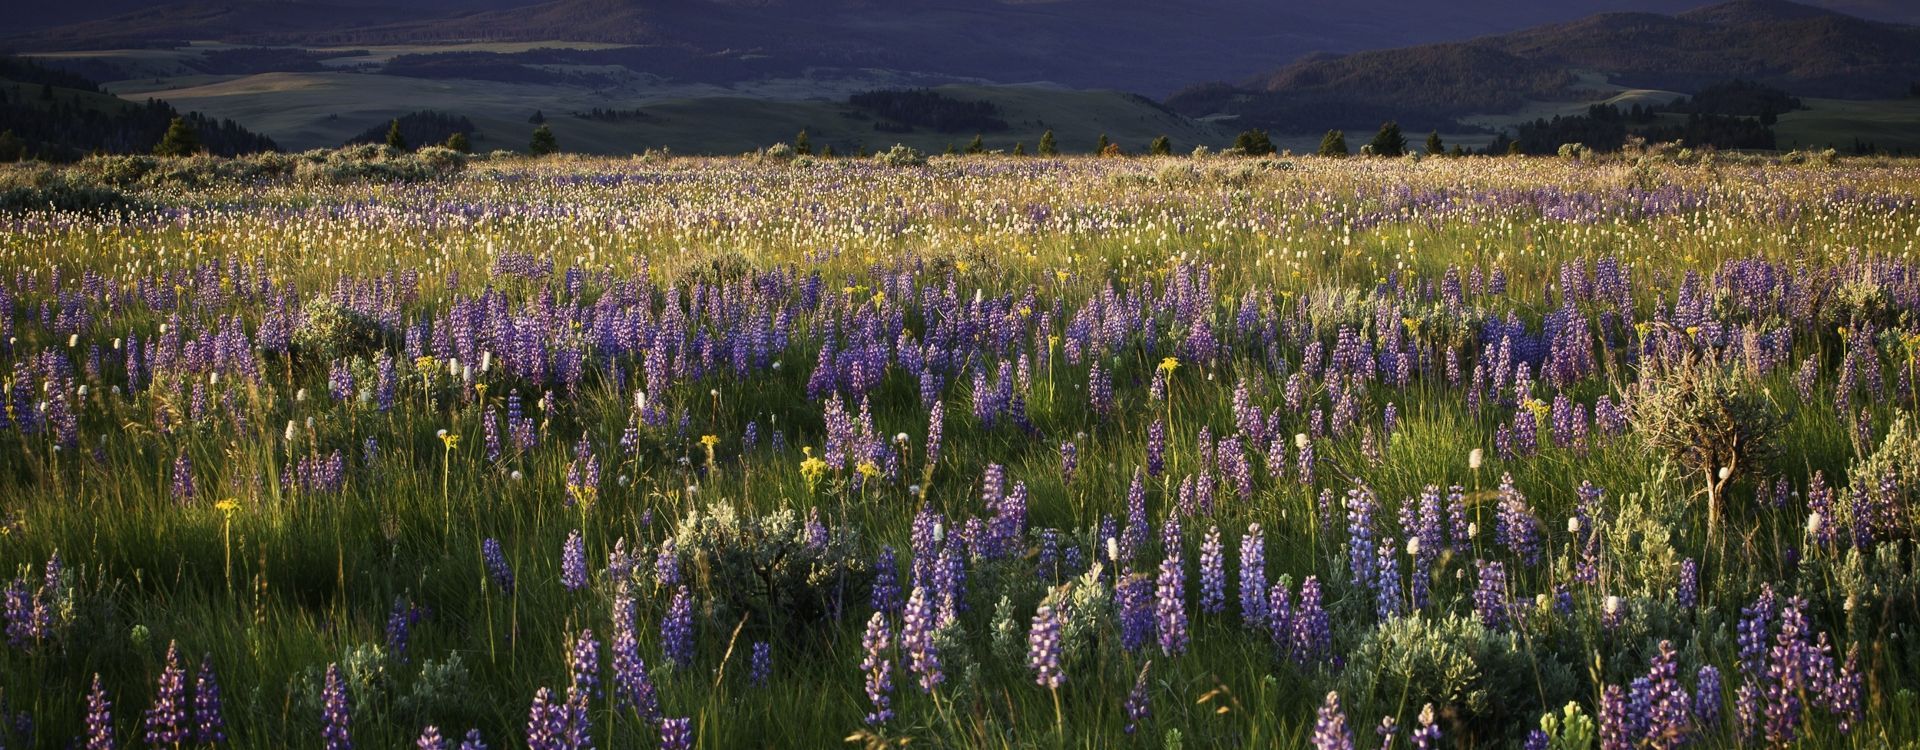 ranch-rock-creek-signature-images-Lupine-Wildflower-Mountain-Meadows.jpg